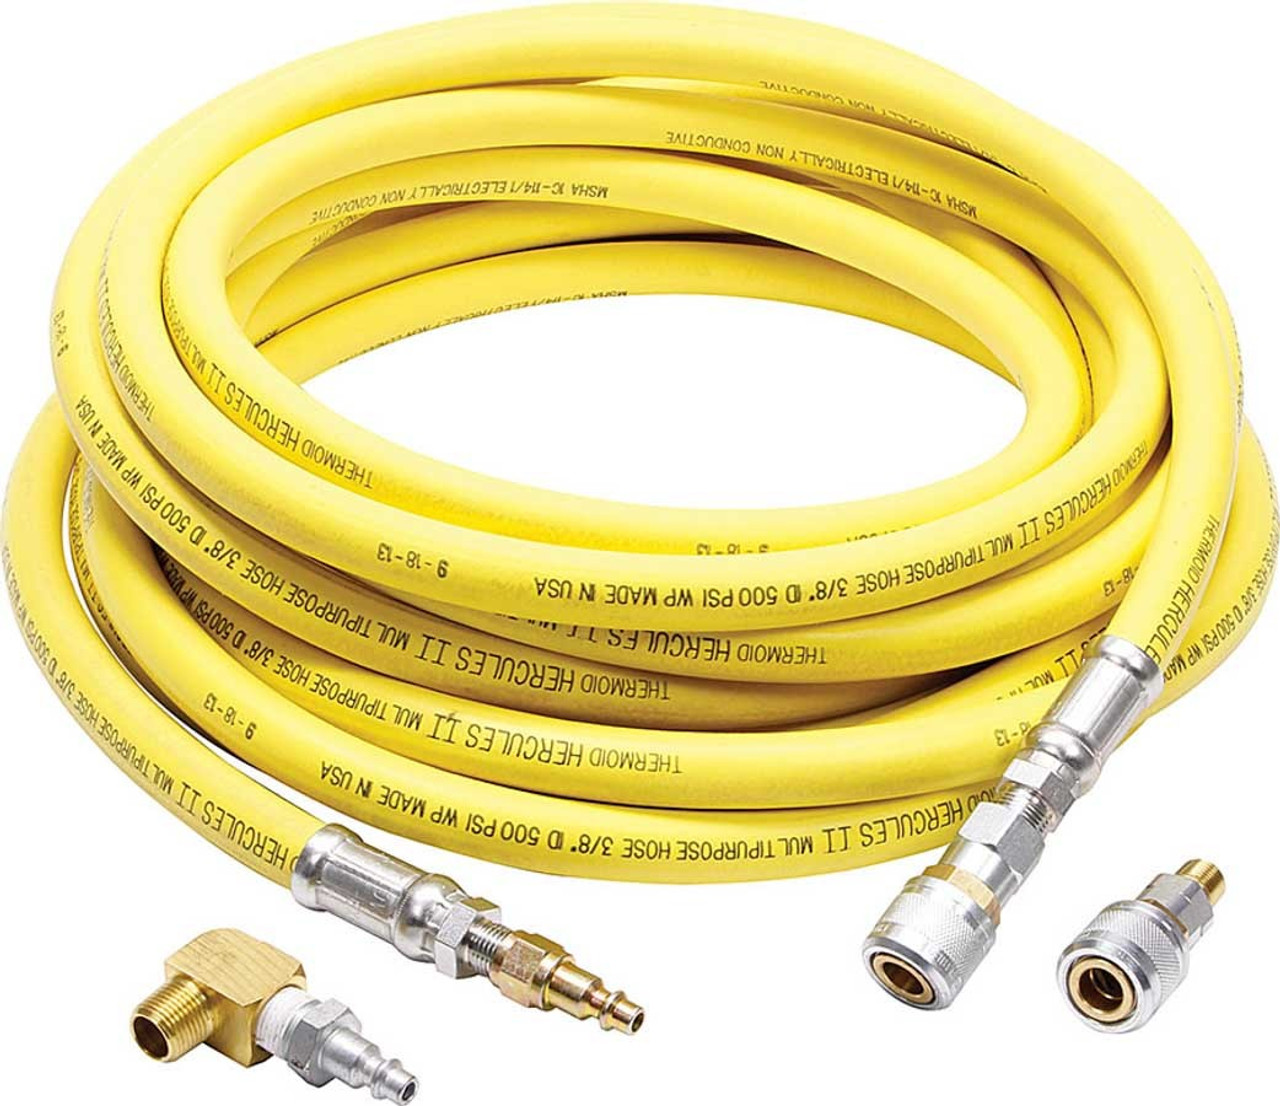 Kit includes:35ft of 3/8 ID Thermoid Hercules hose rated at 500psi and includes 3/8-18 NPT Male Ends.1pc Female Q/R Fitting w/3/8-18 NPT Female End 1pc Female Q/R Fitting w/1/4-18 NPT Male End 1pc Male Q/R Fitting w/3/8-18 NPT Female End 1pc Male Q/R Fitting w/1/4-18 NPT Male End 1pc 3/8-18 NPT Female to Male Elbow